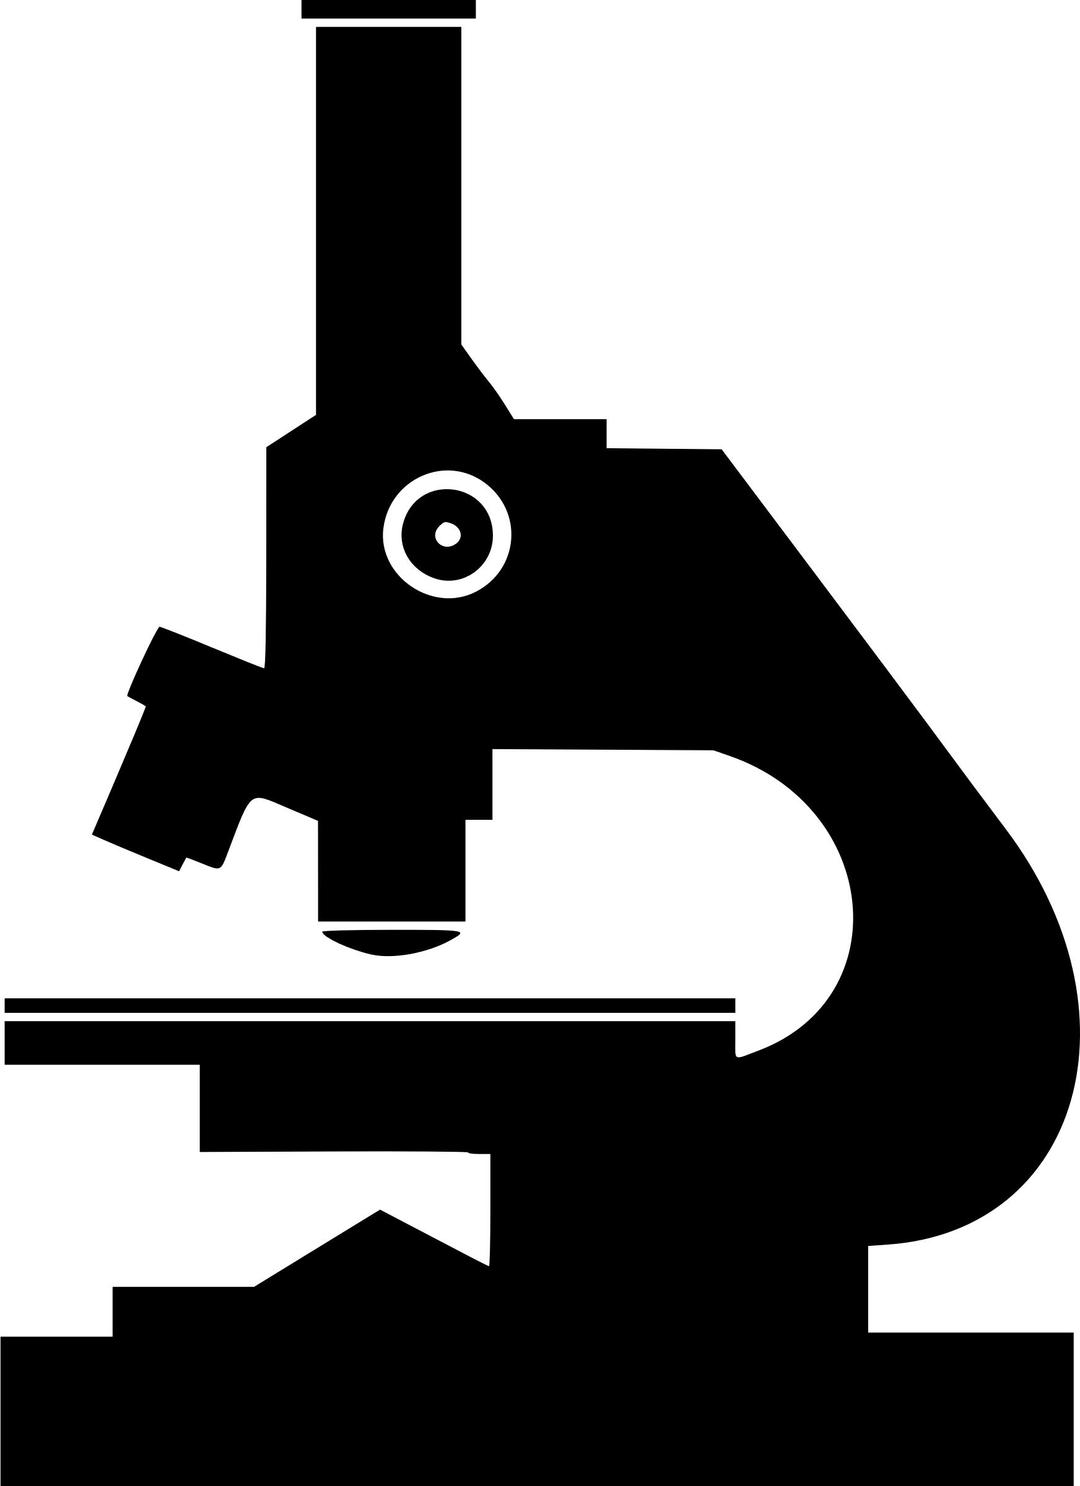 Microscope 3 png transparent